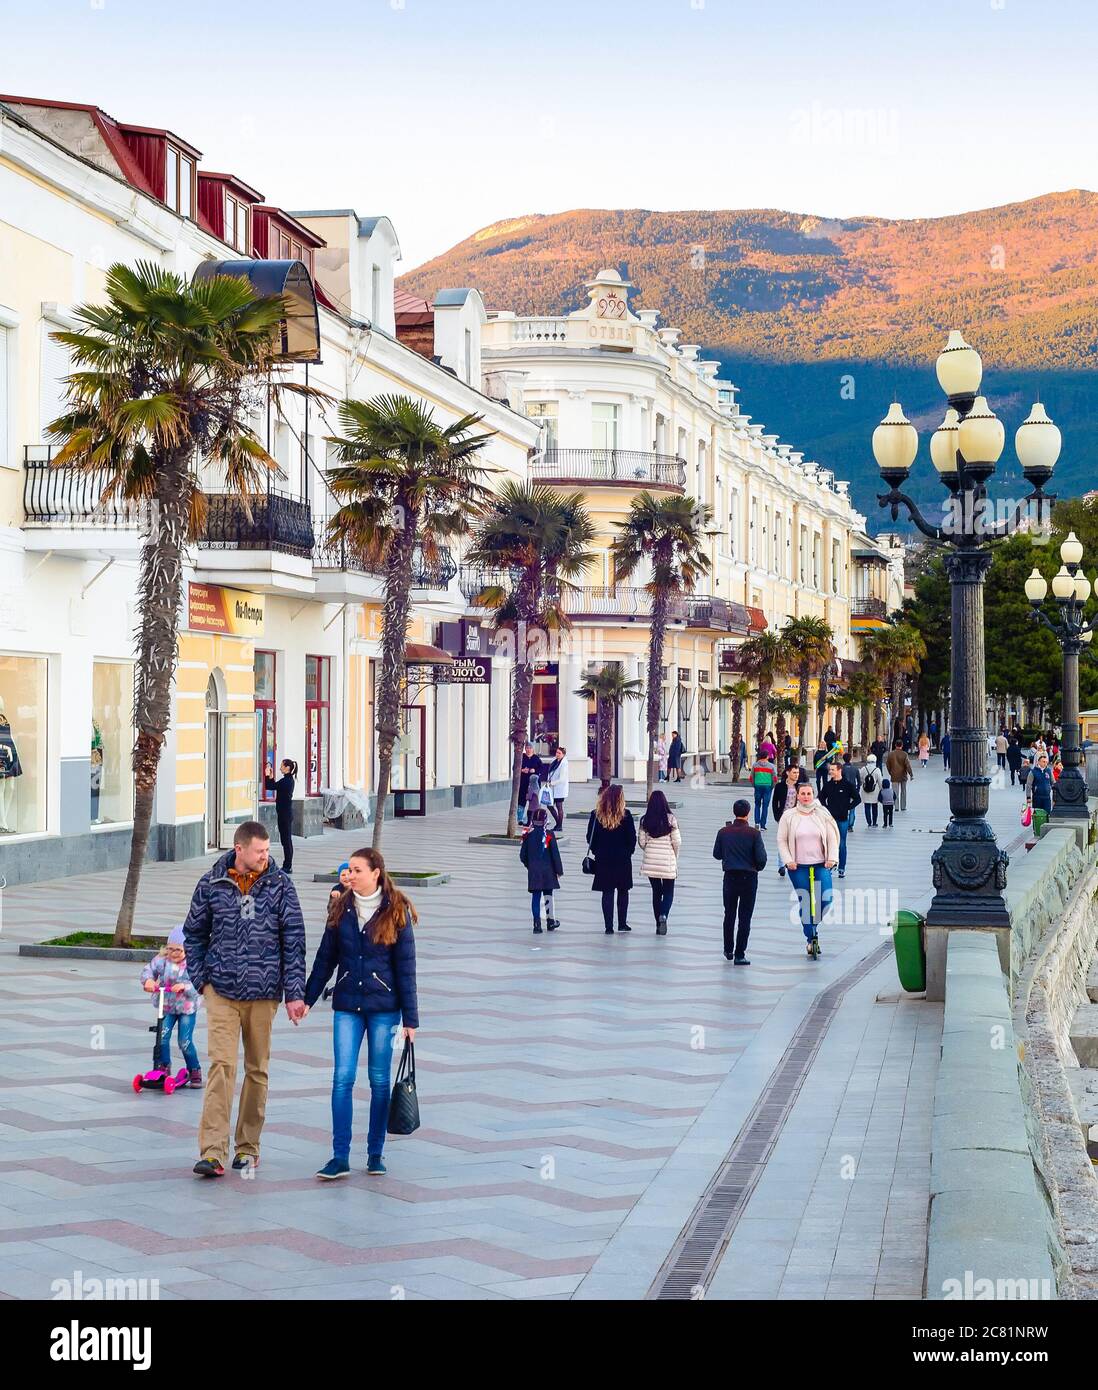 YALTA, CRIMEA - APRIL 3, 2018: People walking by resort city embankment, mountain in sunset light in background Stock Photo